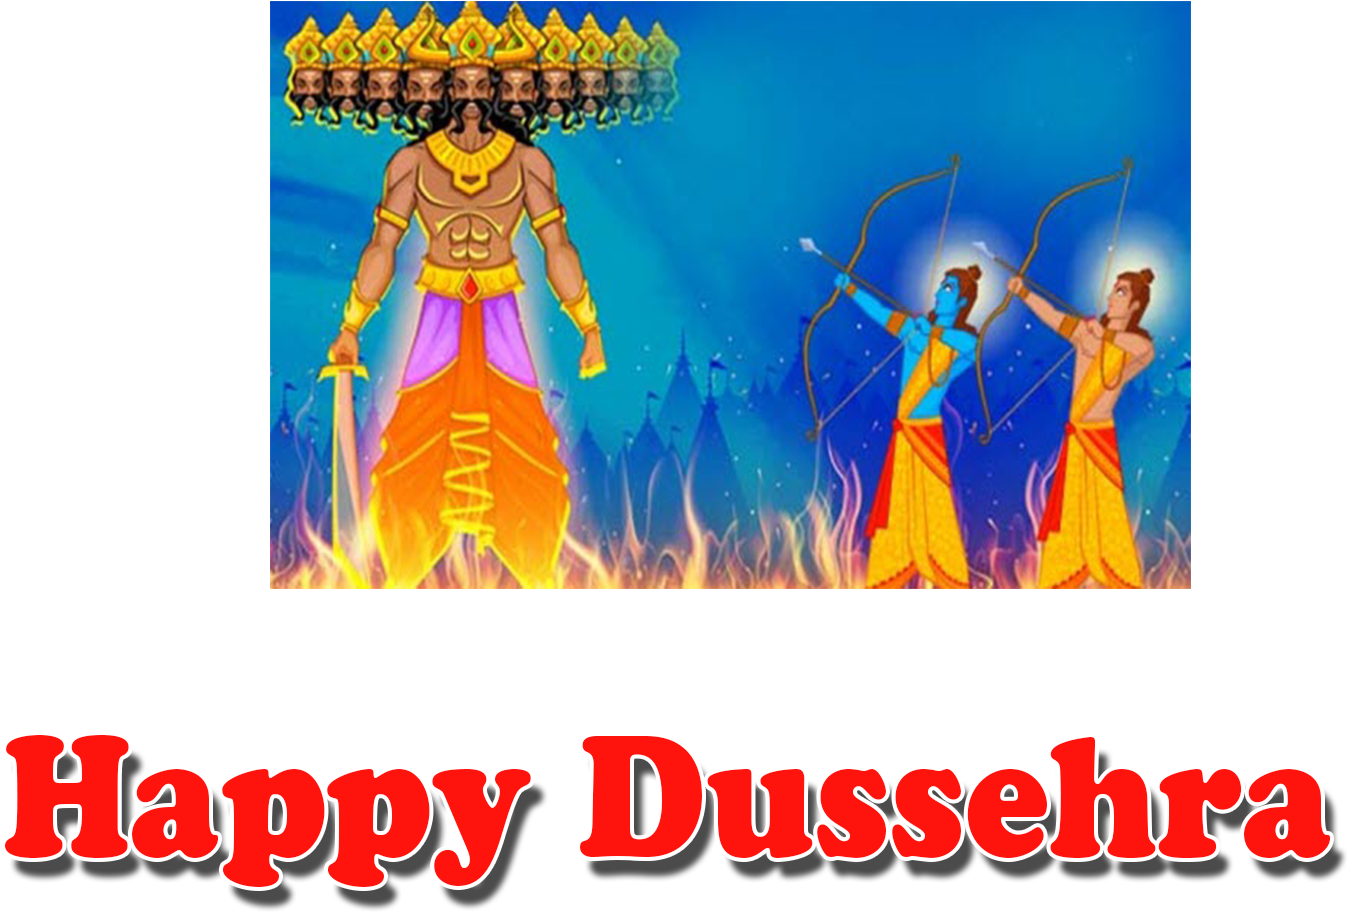 Red Happy Dussehra